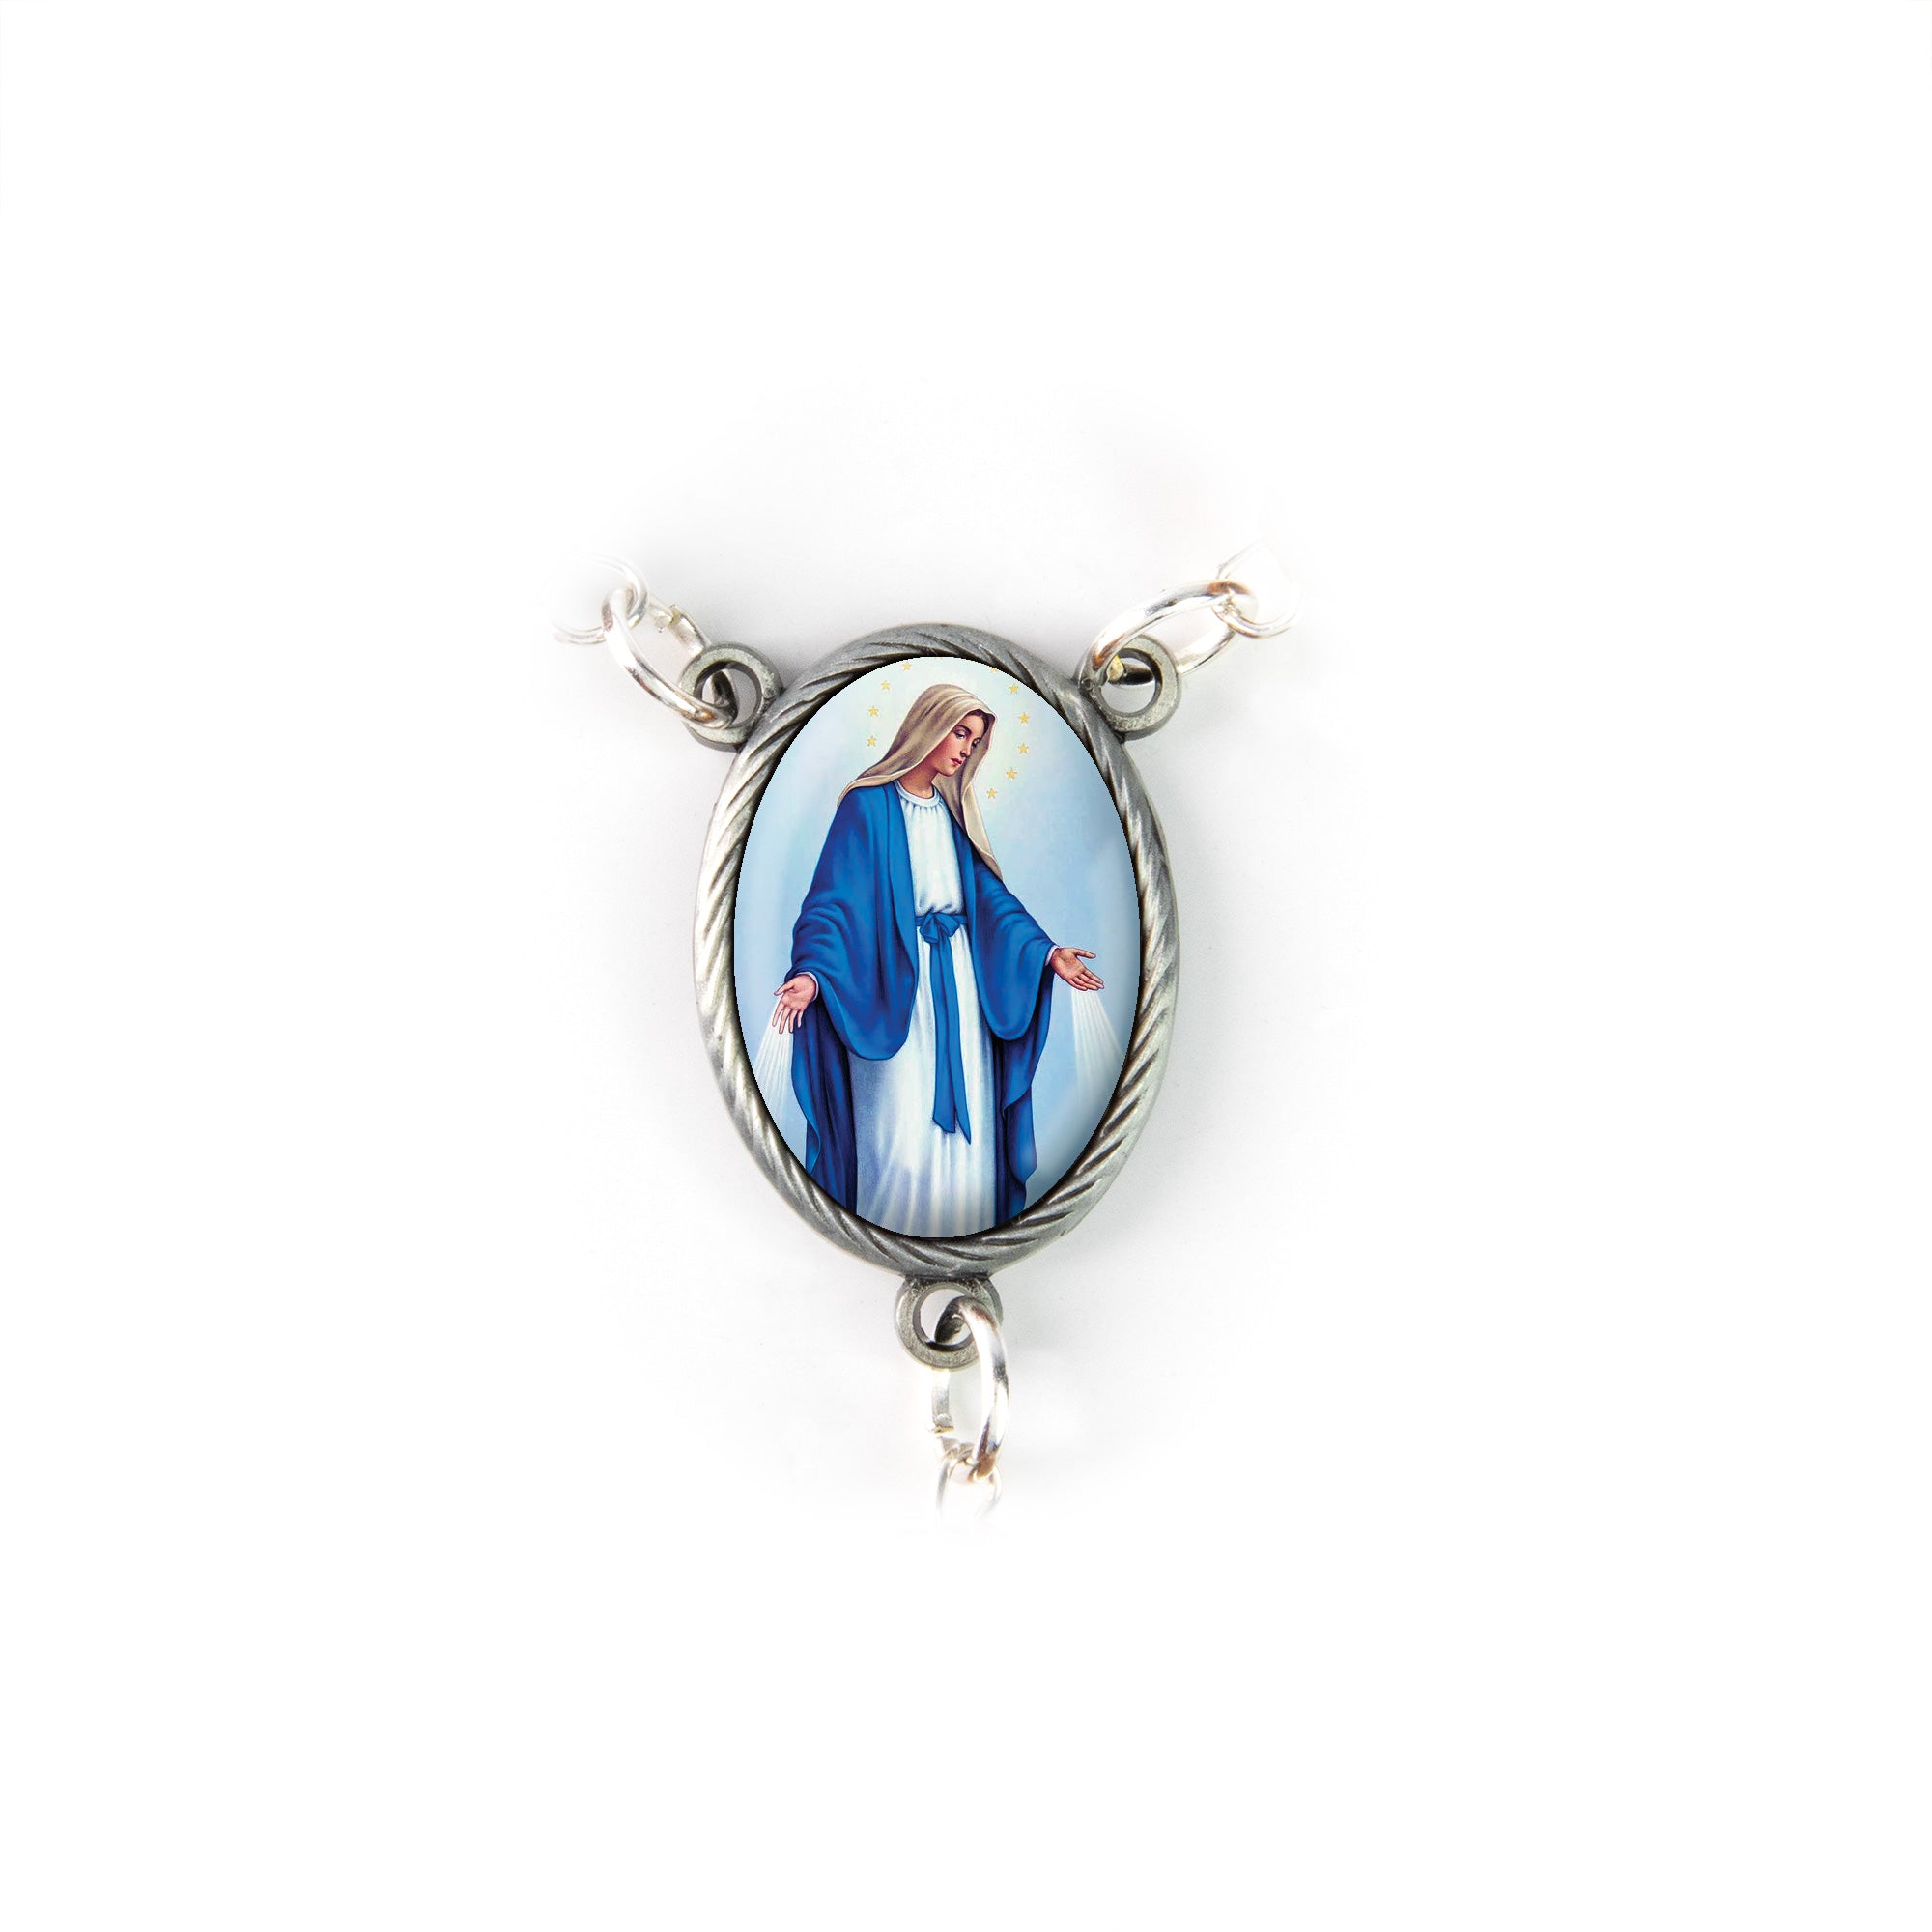 Our Lady of Grace, Holy Land Olive Wood Pocket Auto Rosary, Made in Bethlehem icon detail